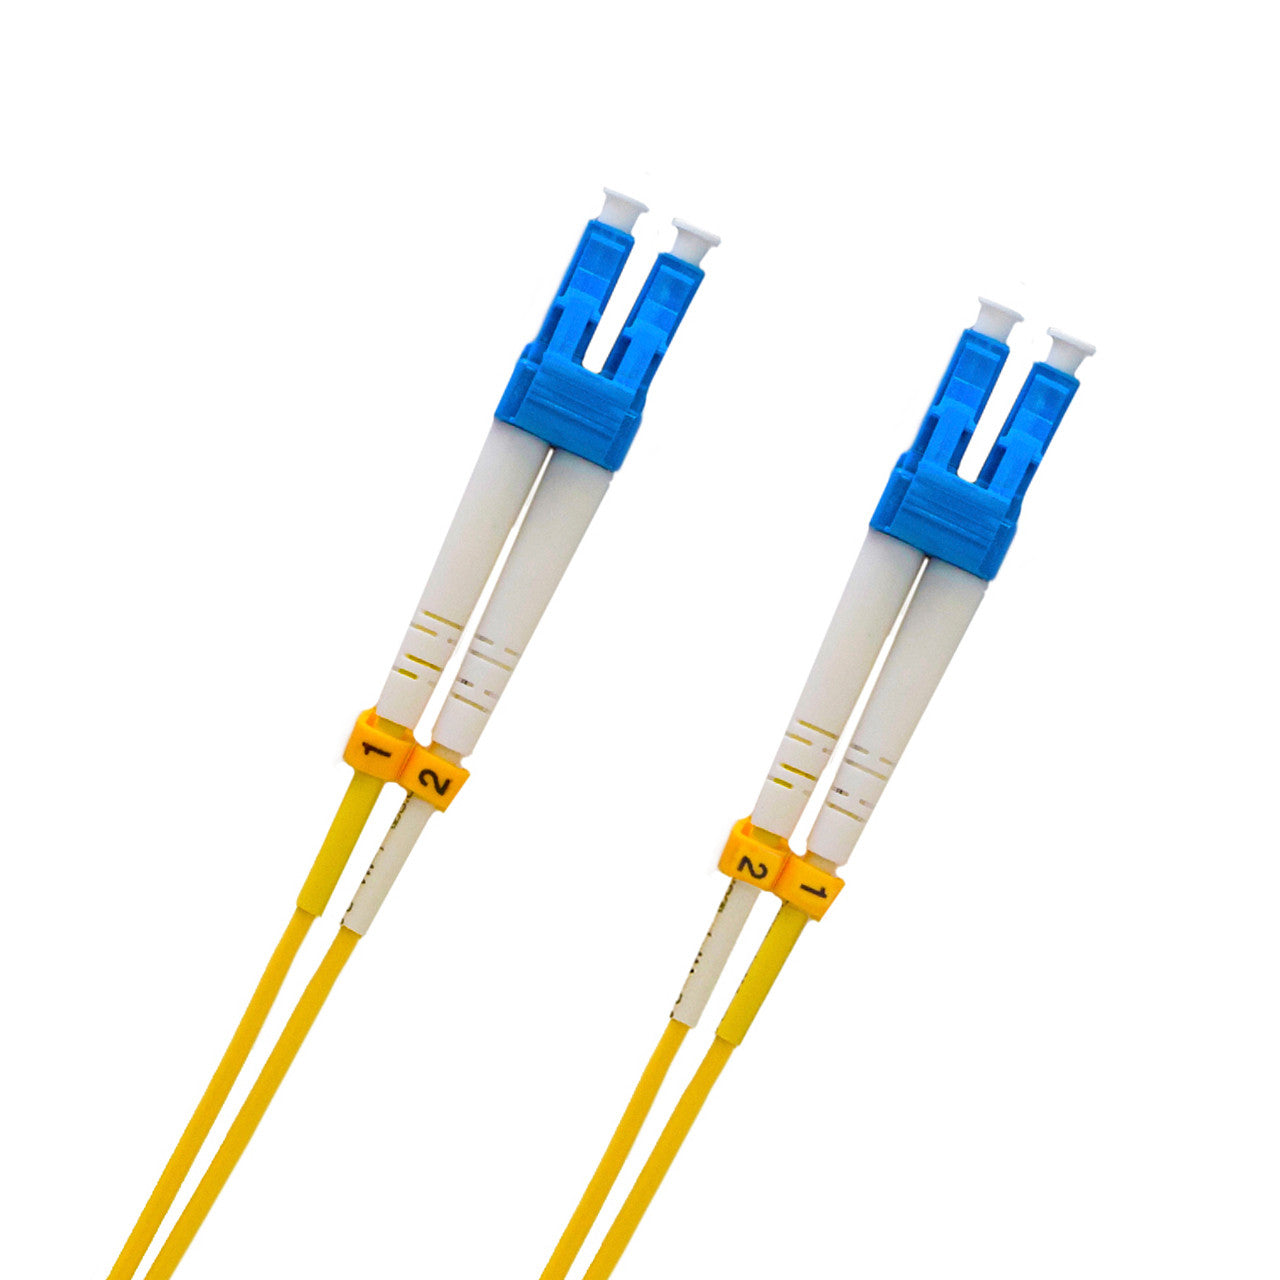 15 Meter LC/LC 9/125 Single-mode OS1 Duplex Fiber Patch Cable